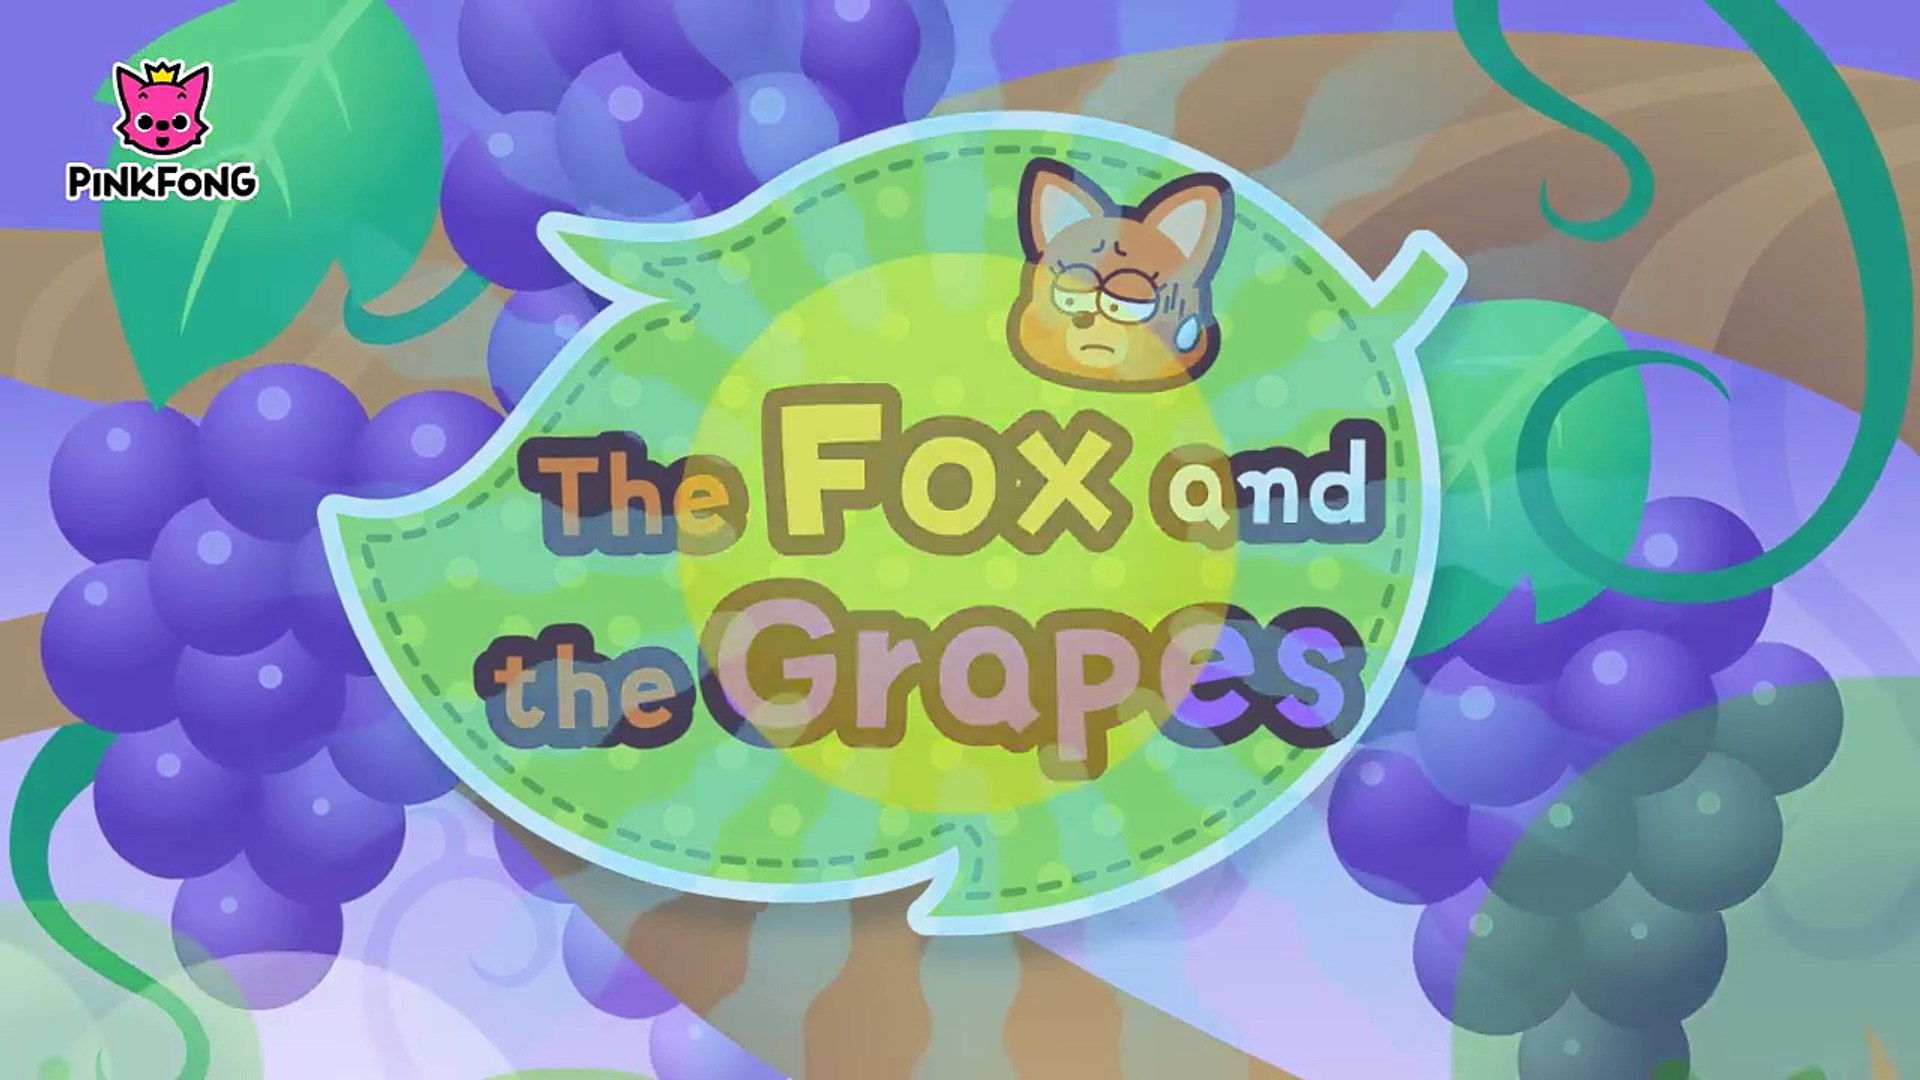 The Fox and the Grapes - Aesop's Fables - Pinkfong Story Time for Children